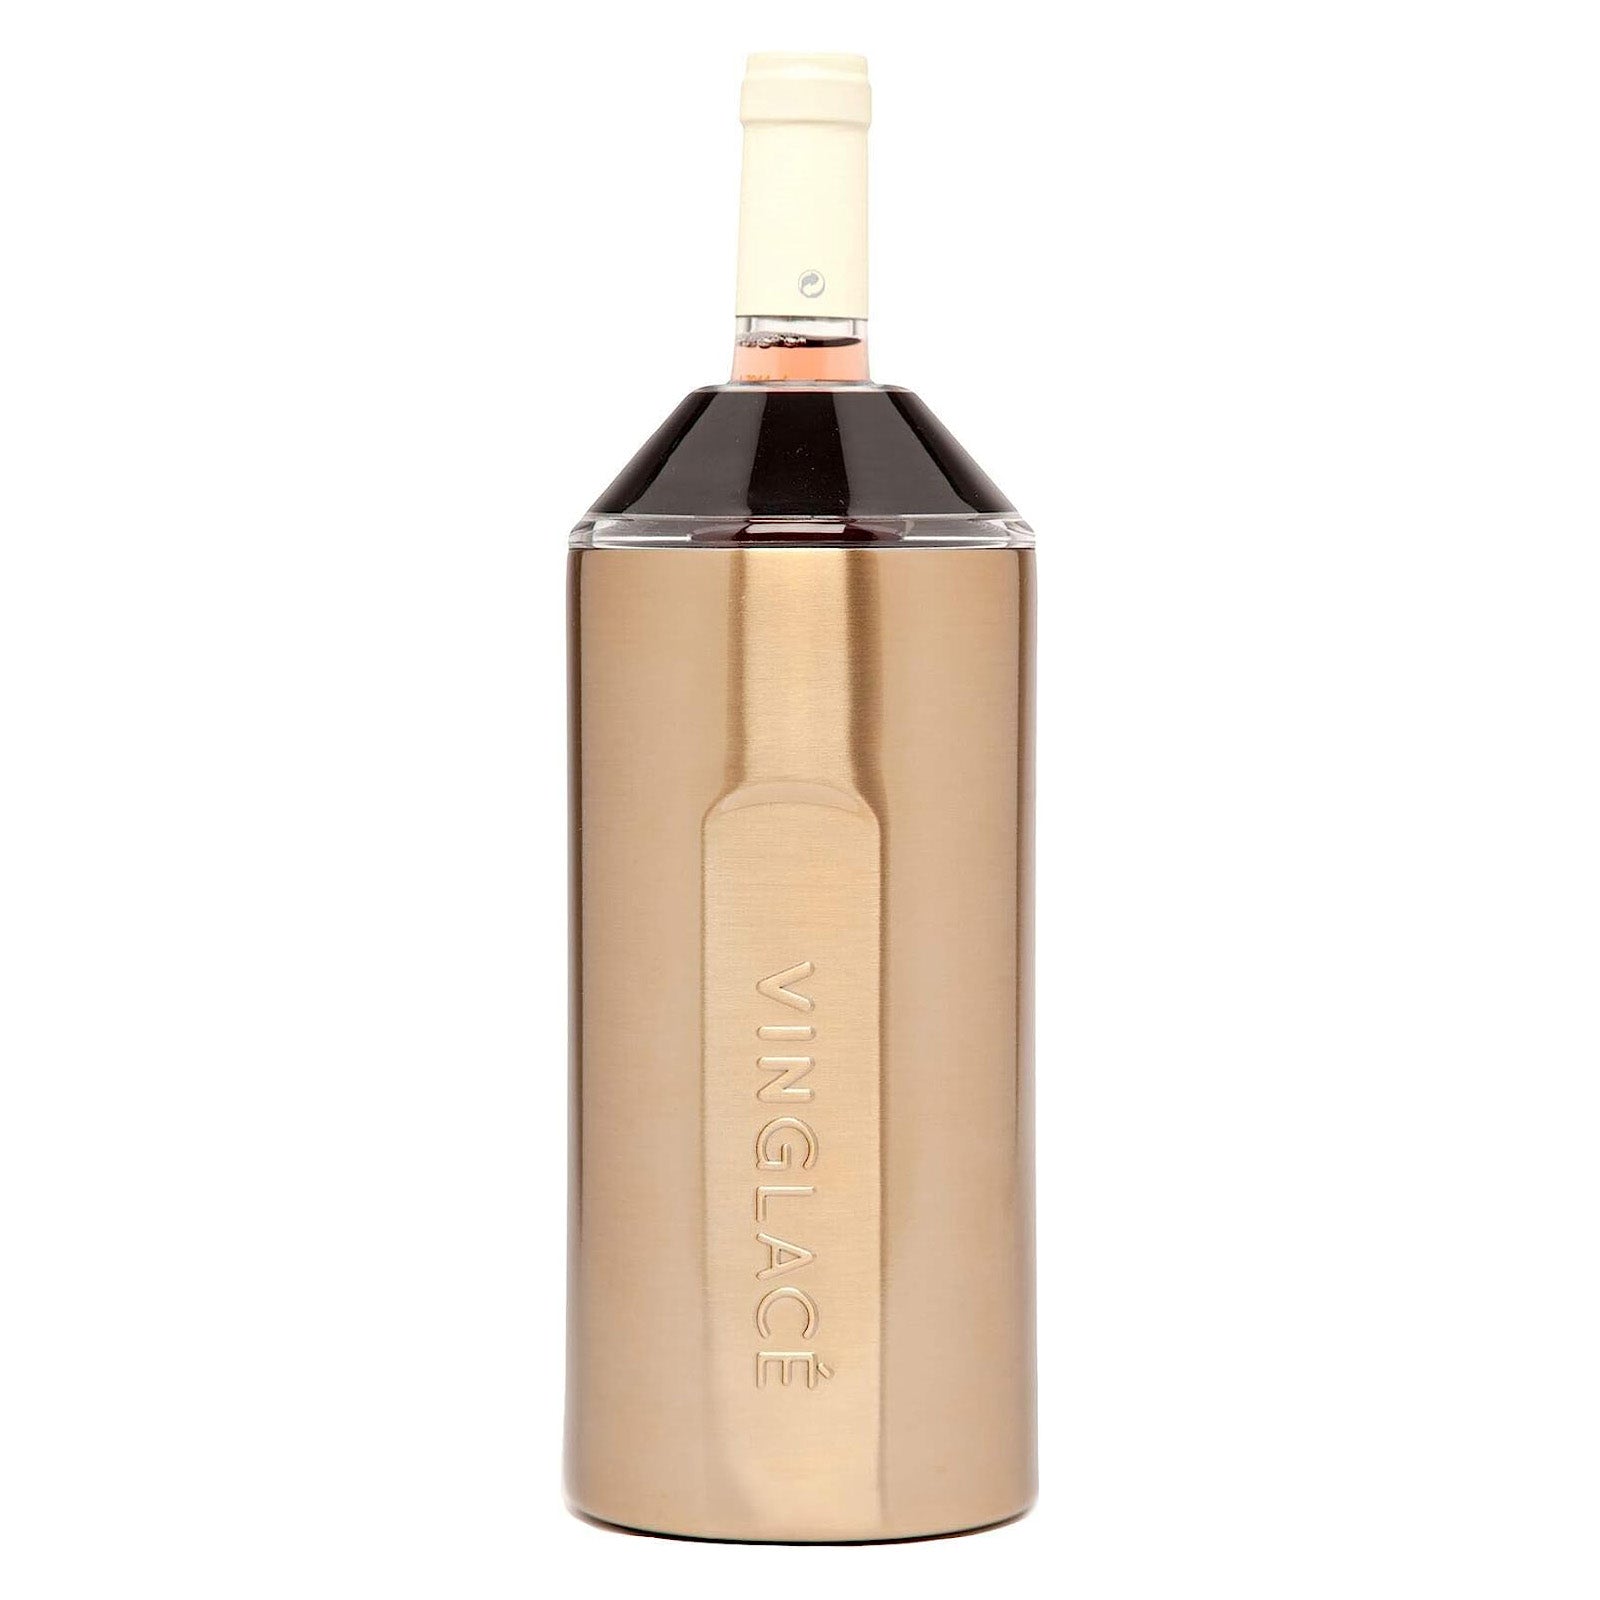 Vinglacé Double Wall Insulated Wine and Champagne Bottle Chiller – UnMask